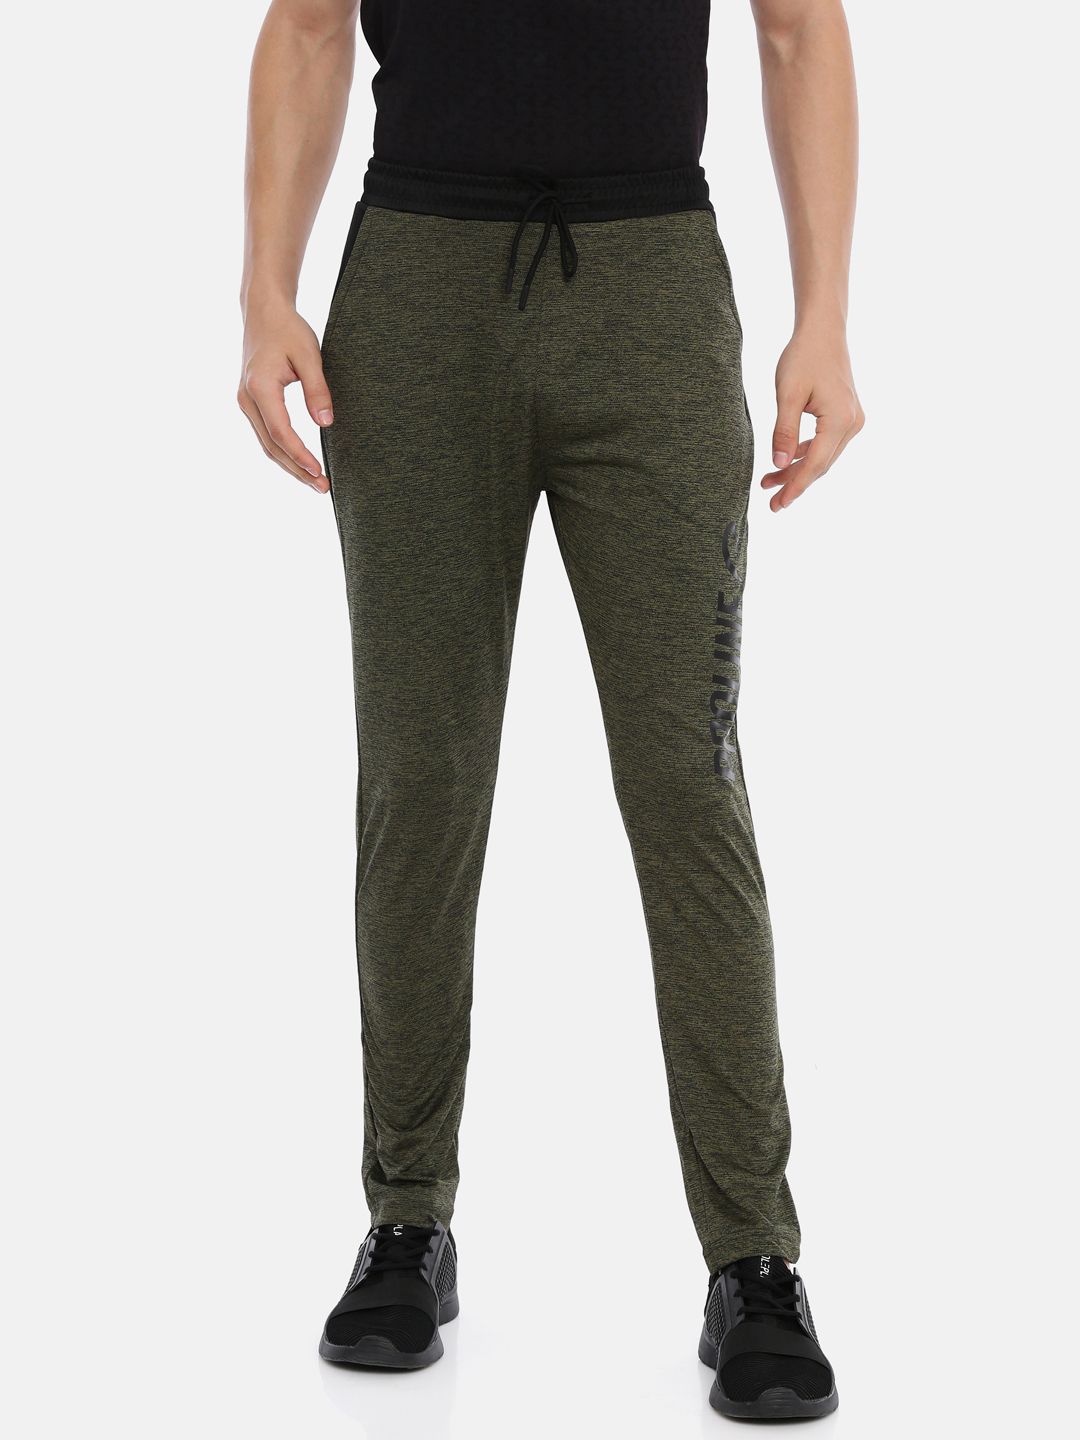 Upgrade Your Style with Men's Cotton Sweatpants, Joggers, and Track Pants:  Perfect for Casual Wear, Running,